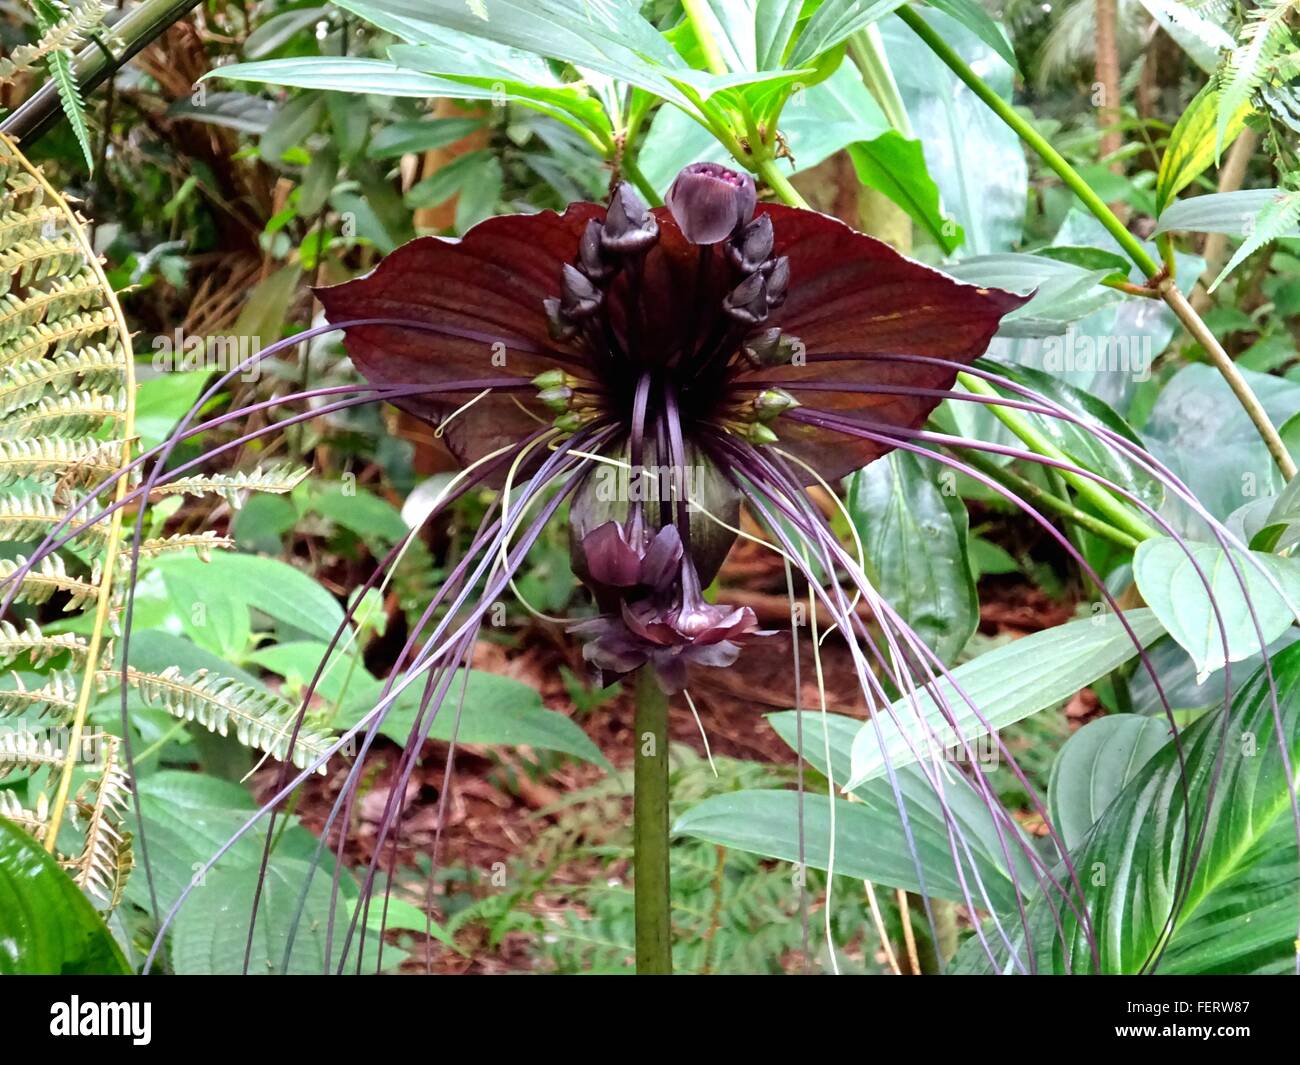 Bat Plant High Resolution Stock Photography and Images - Alamy